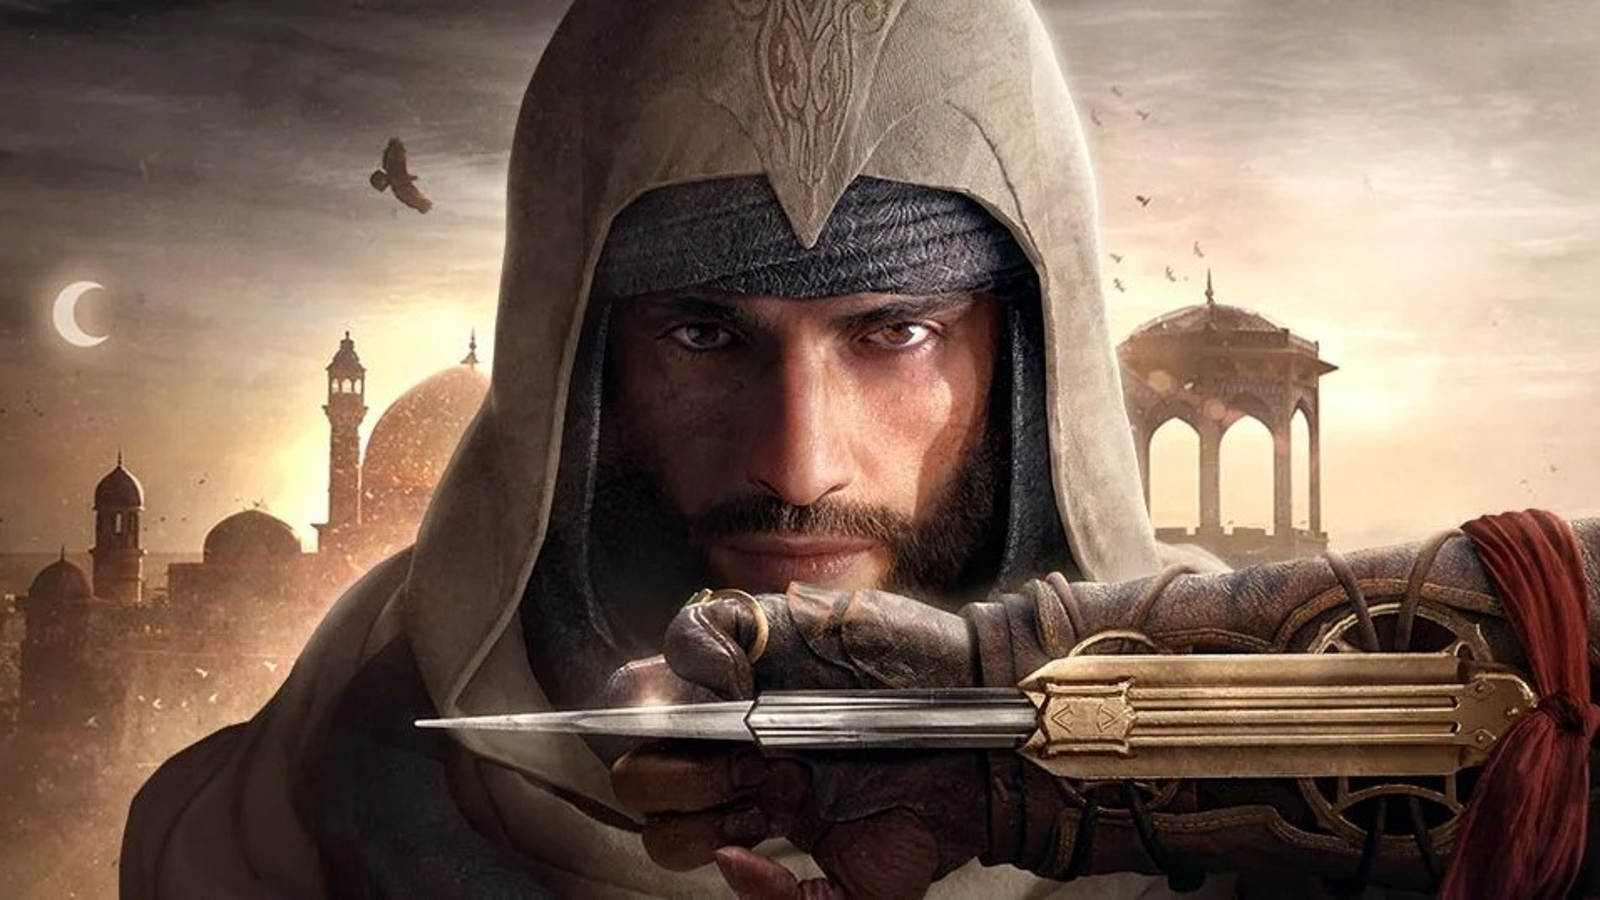 Exclusive Interview: Ubisoft's Creative Teams on Assassin's Creed